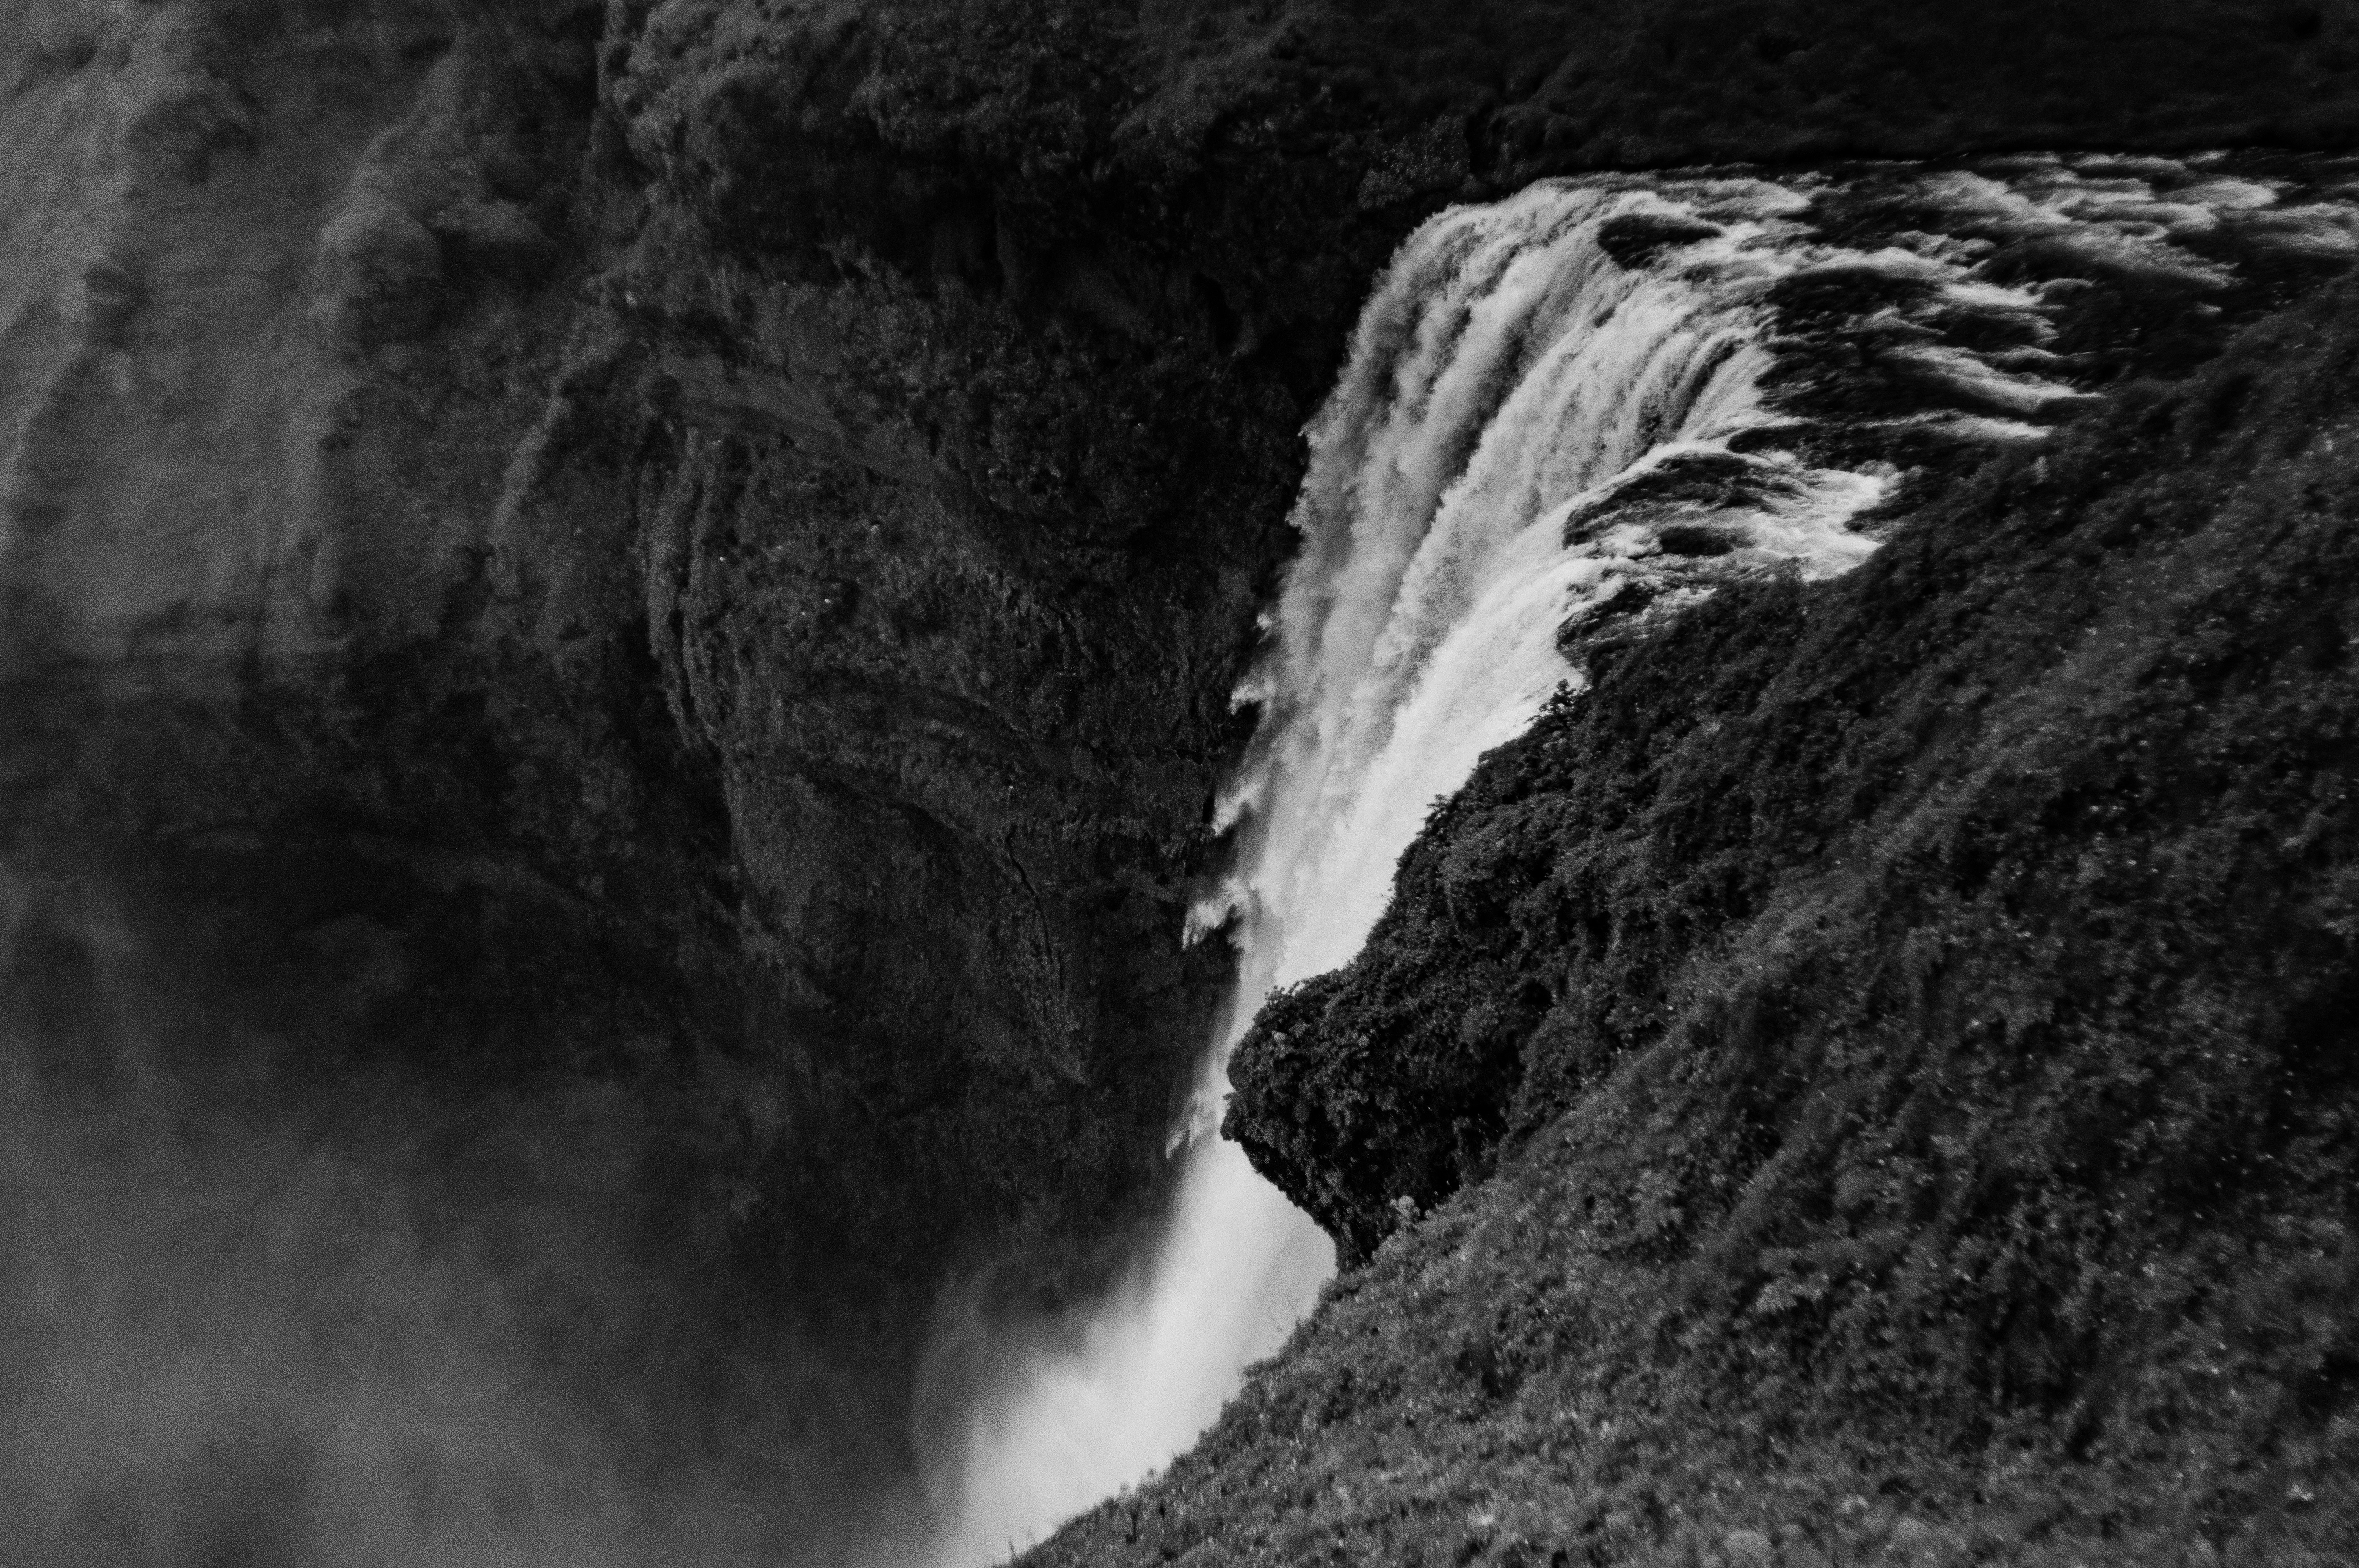 gray scale photo of waterfalls